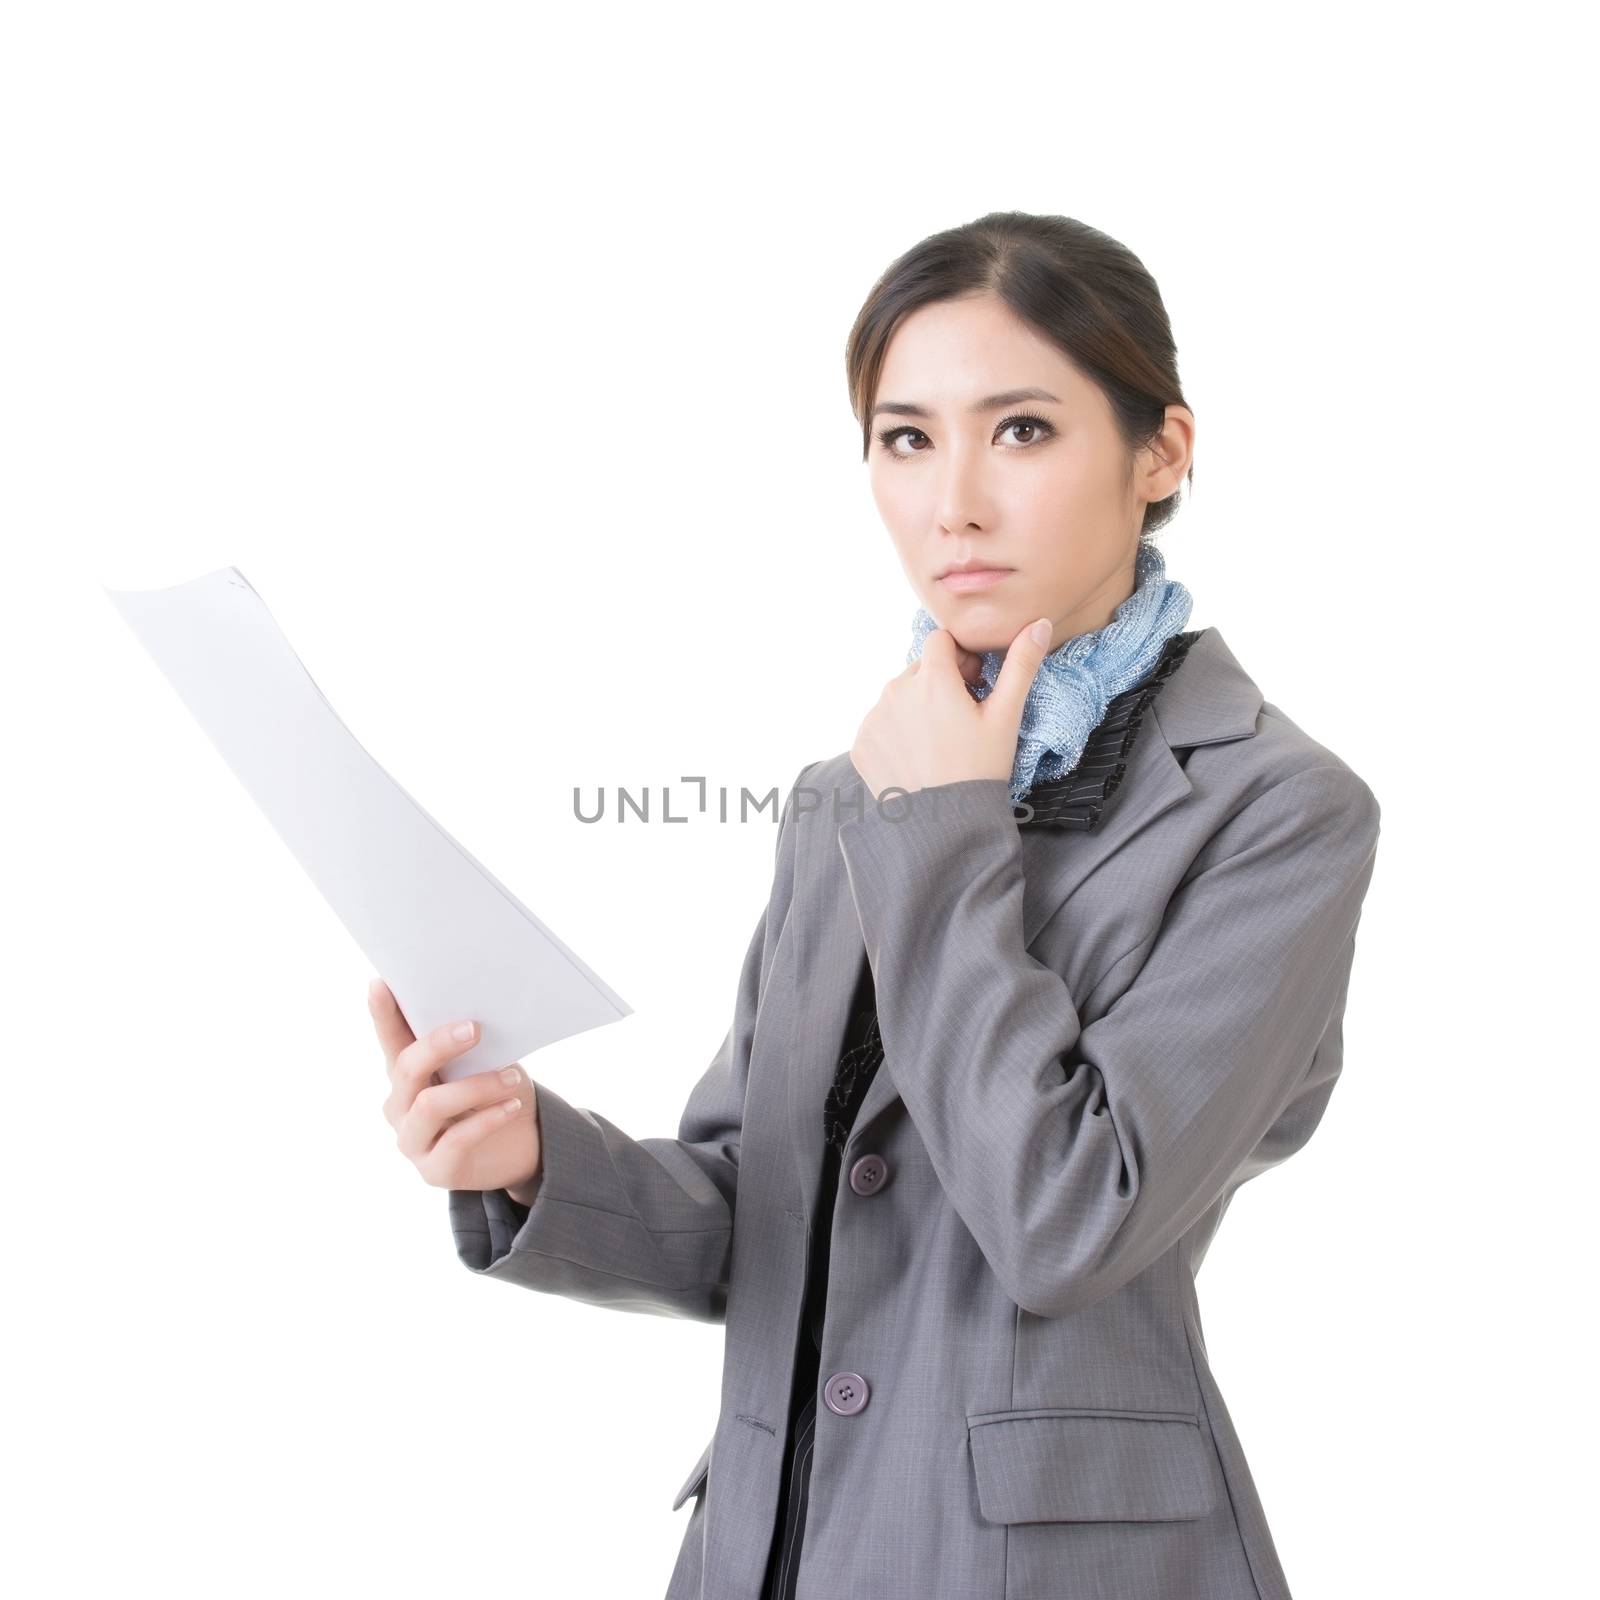 Pensive asian business woman holding file document paper. Isolated on the white background.